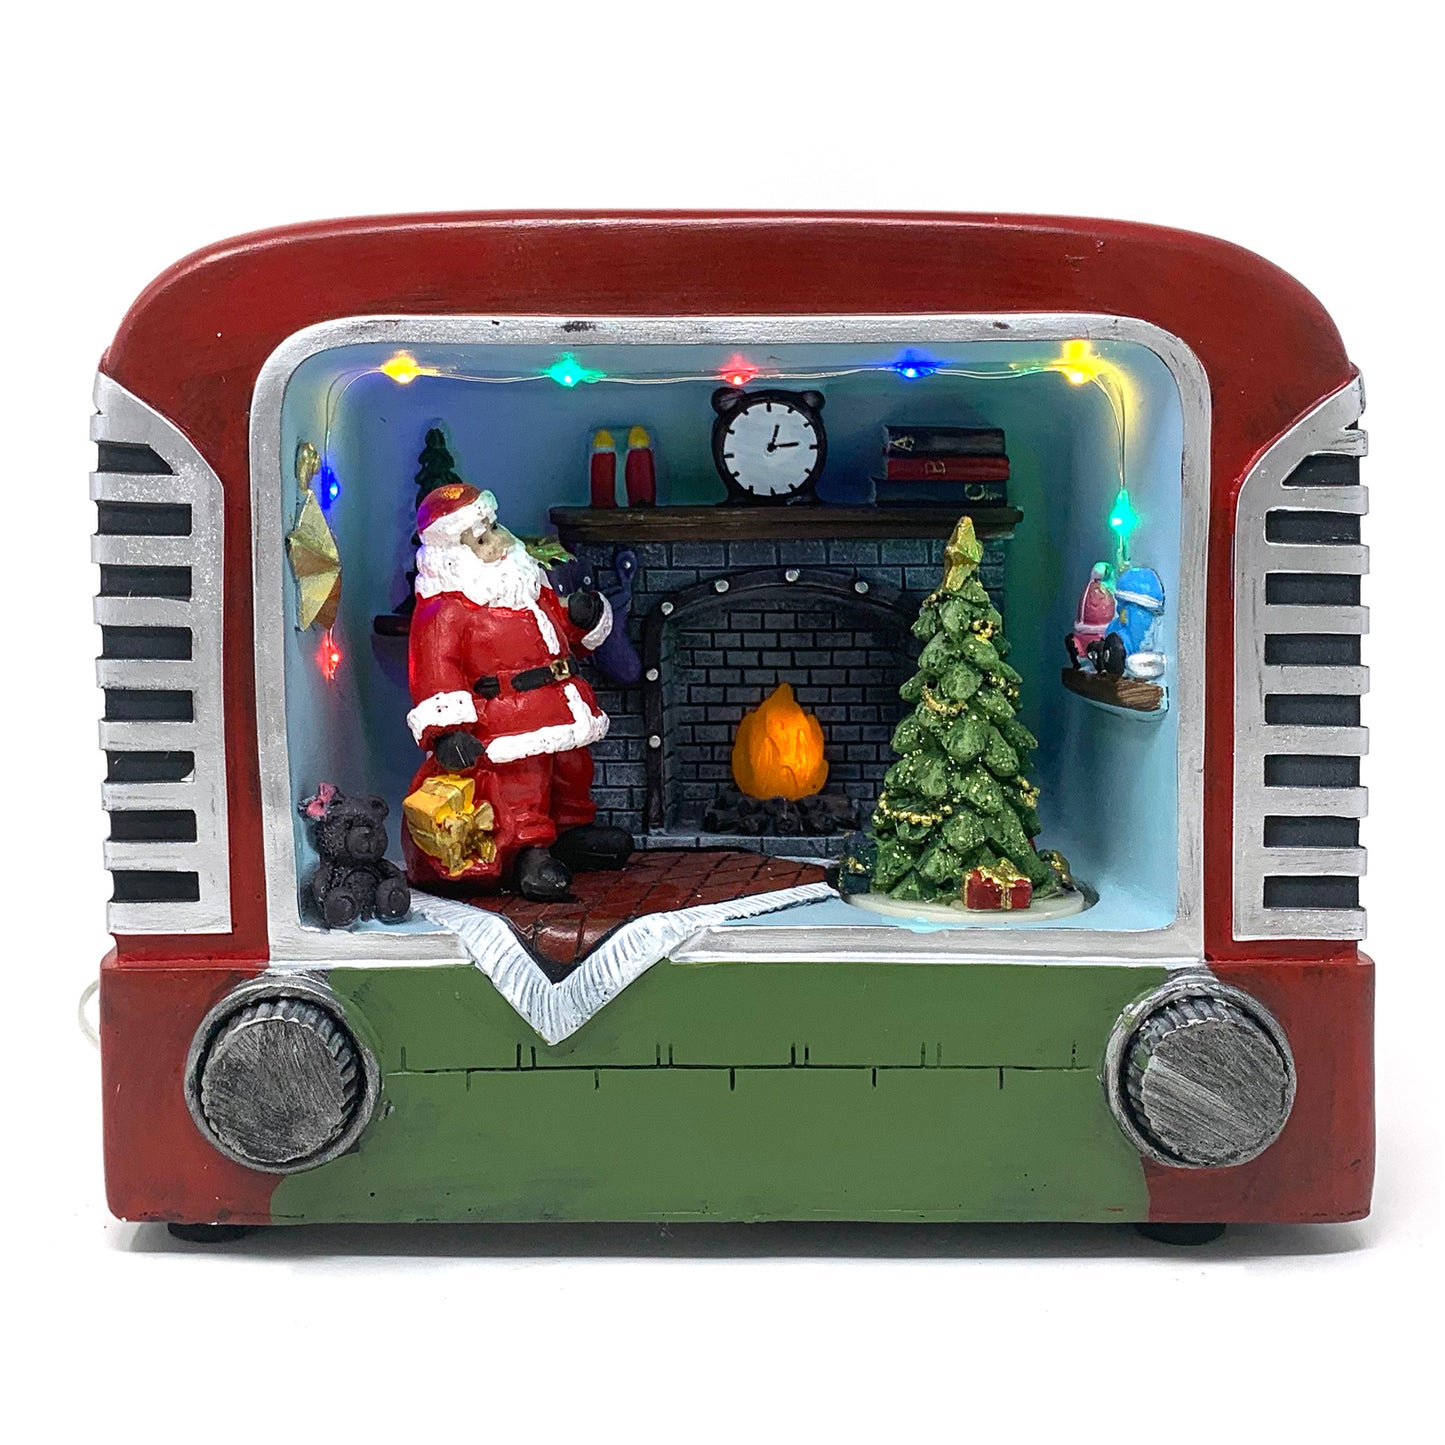 Crafted Polyresin Christmas House Collectable Décor Building House Figurine with USB and Battery Dual Power Source-Old TV and Santa-XH93409 …